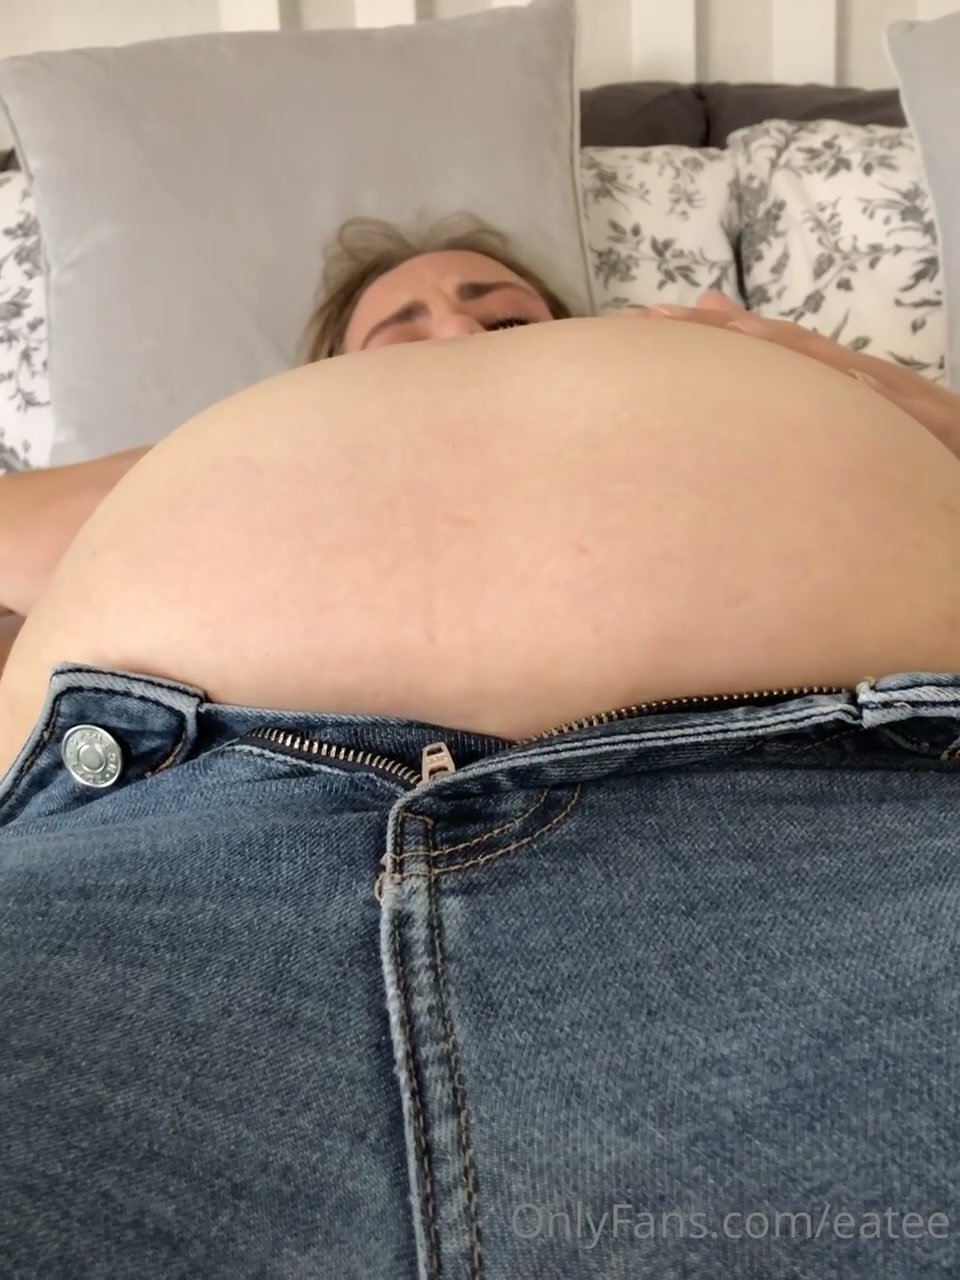 Huge and round: Bloated BBW belly - ThisVid.com